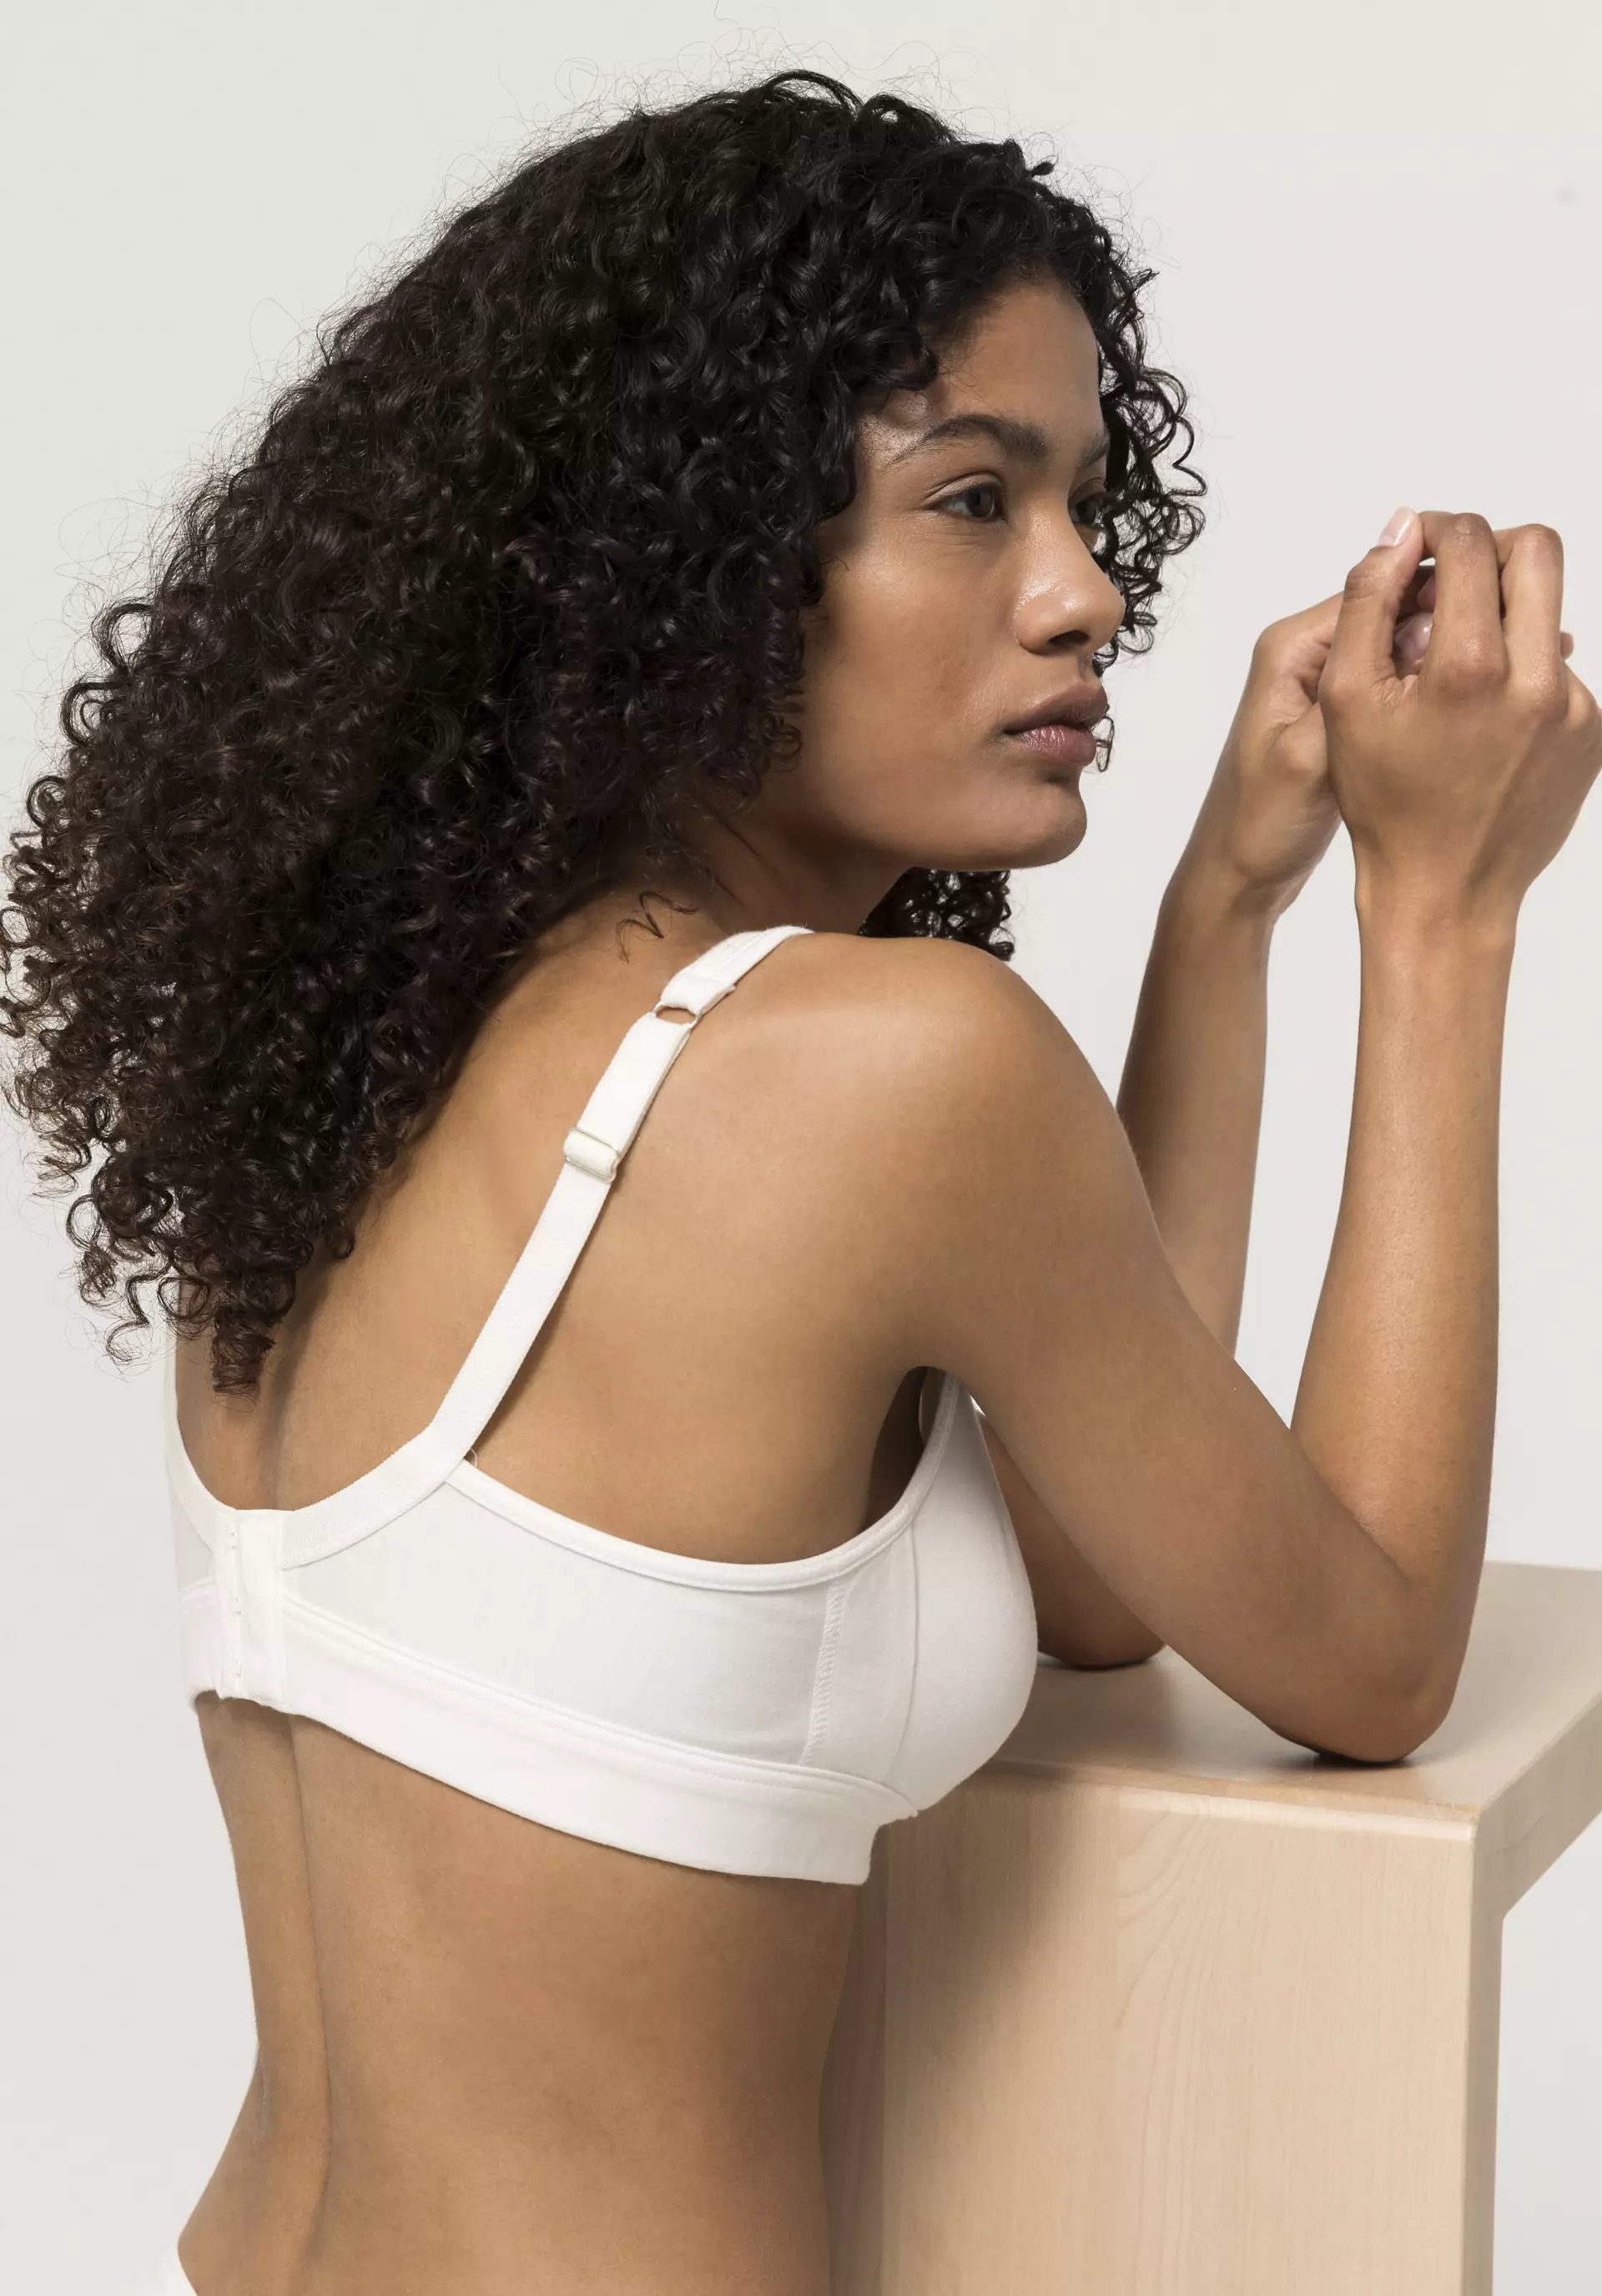 Kindly Yours Women's Sustainable Cotton V neck Bralette